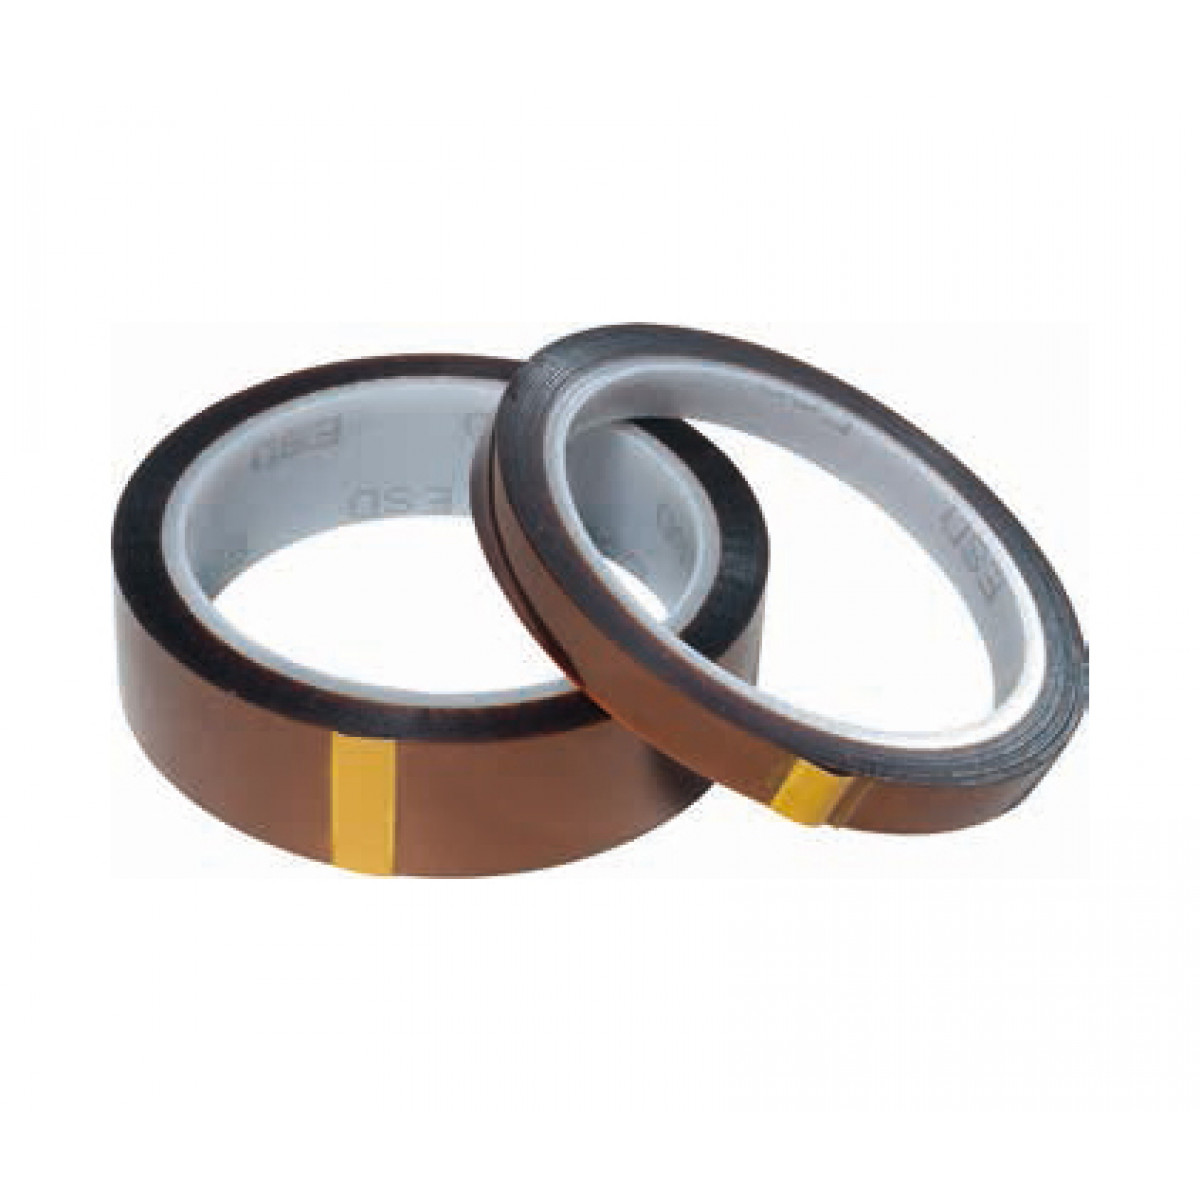 Polyimide adhesive tape